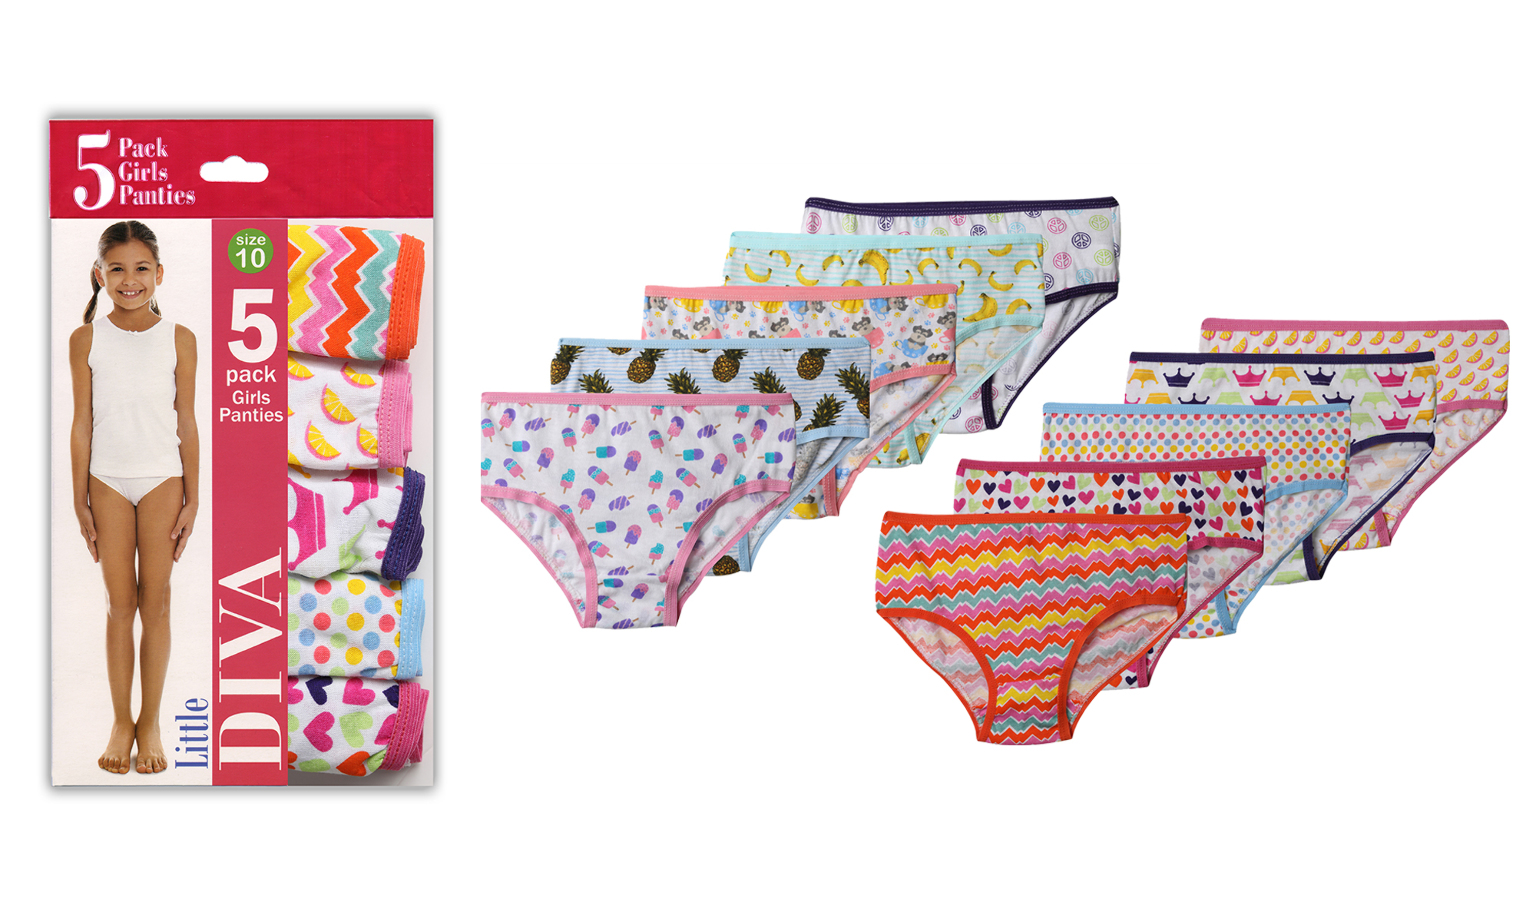 Girl's Panties - Assorted Prints, Size 4, 5 Pack